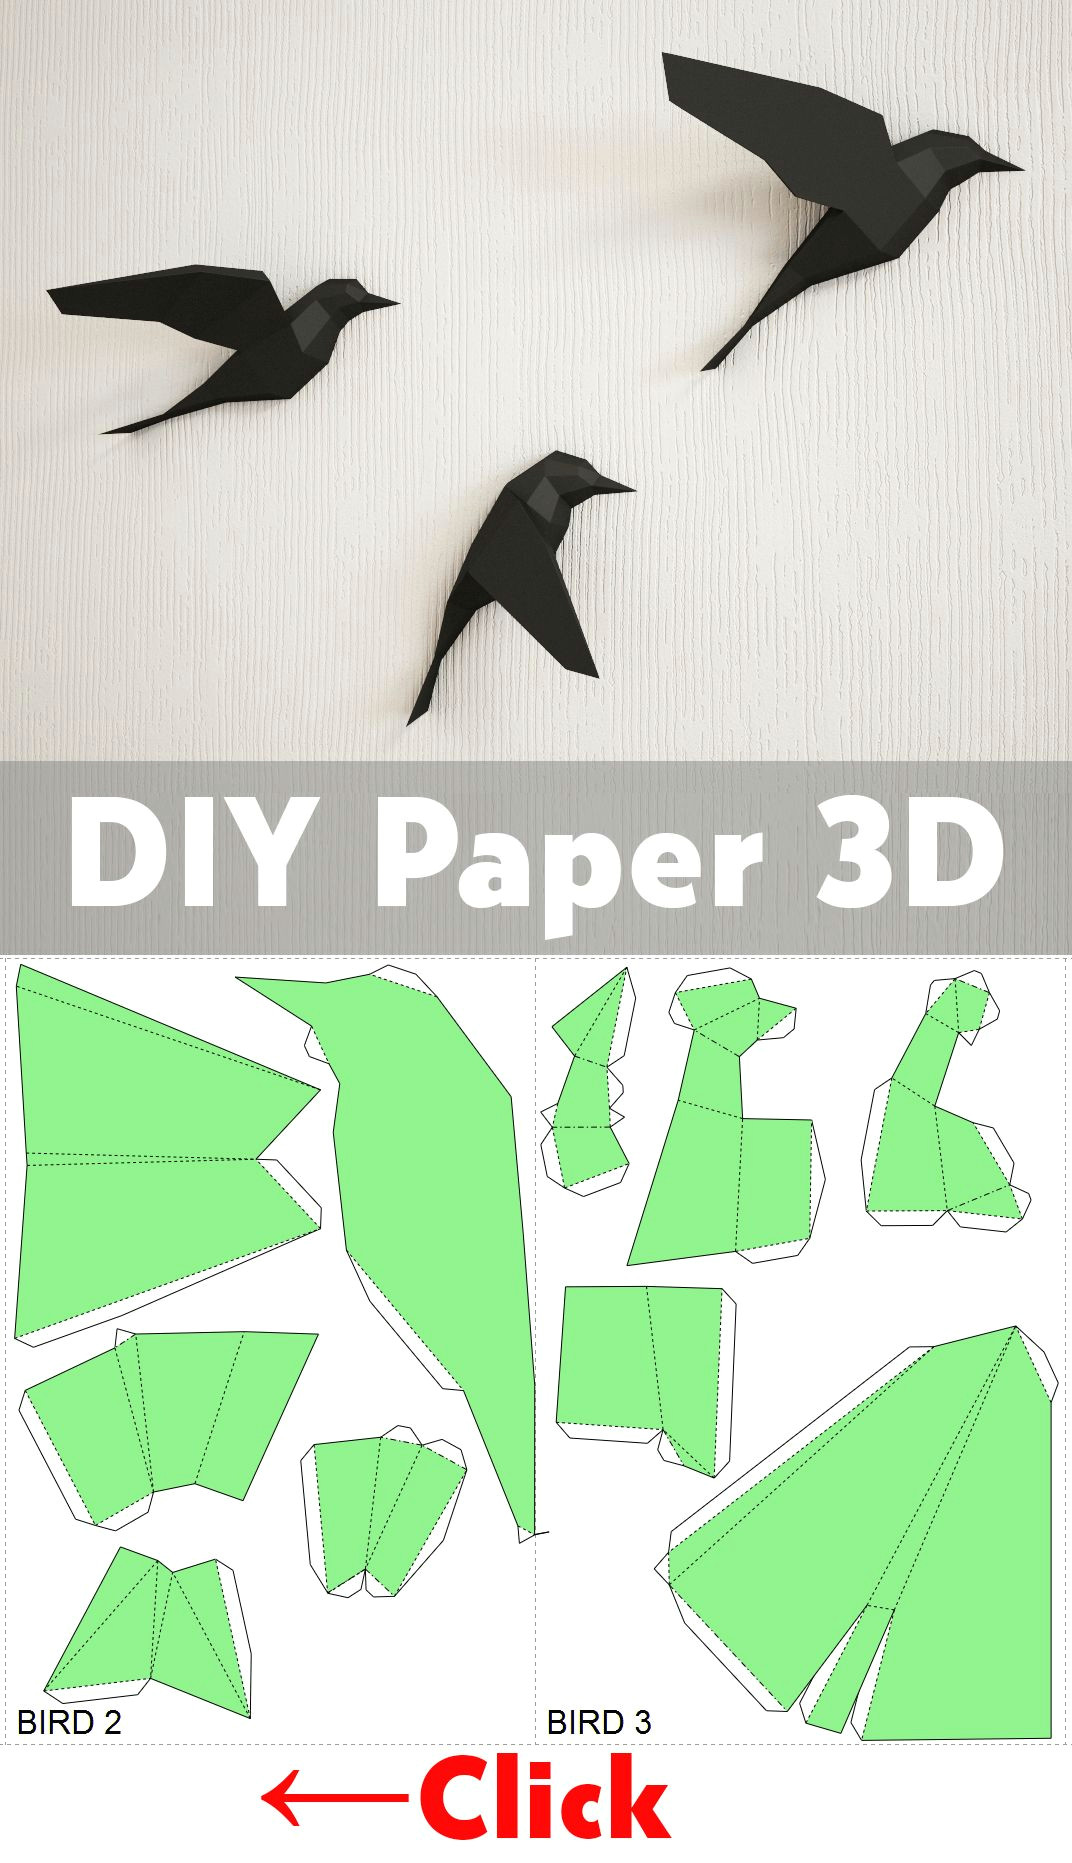 diy crafts paper projects papercraft ideas how to make 3d birds diy house decor crafting do it yourself bird